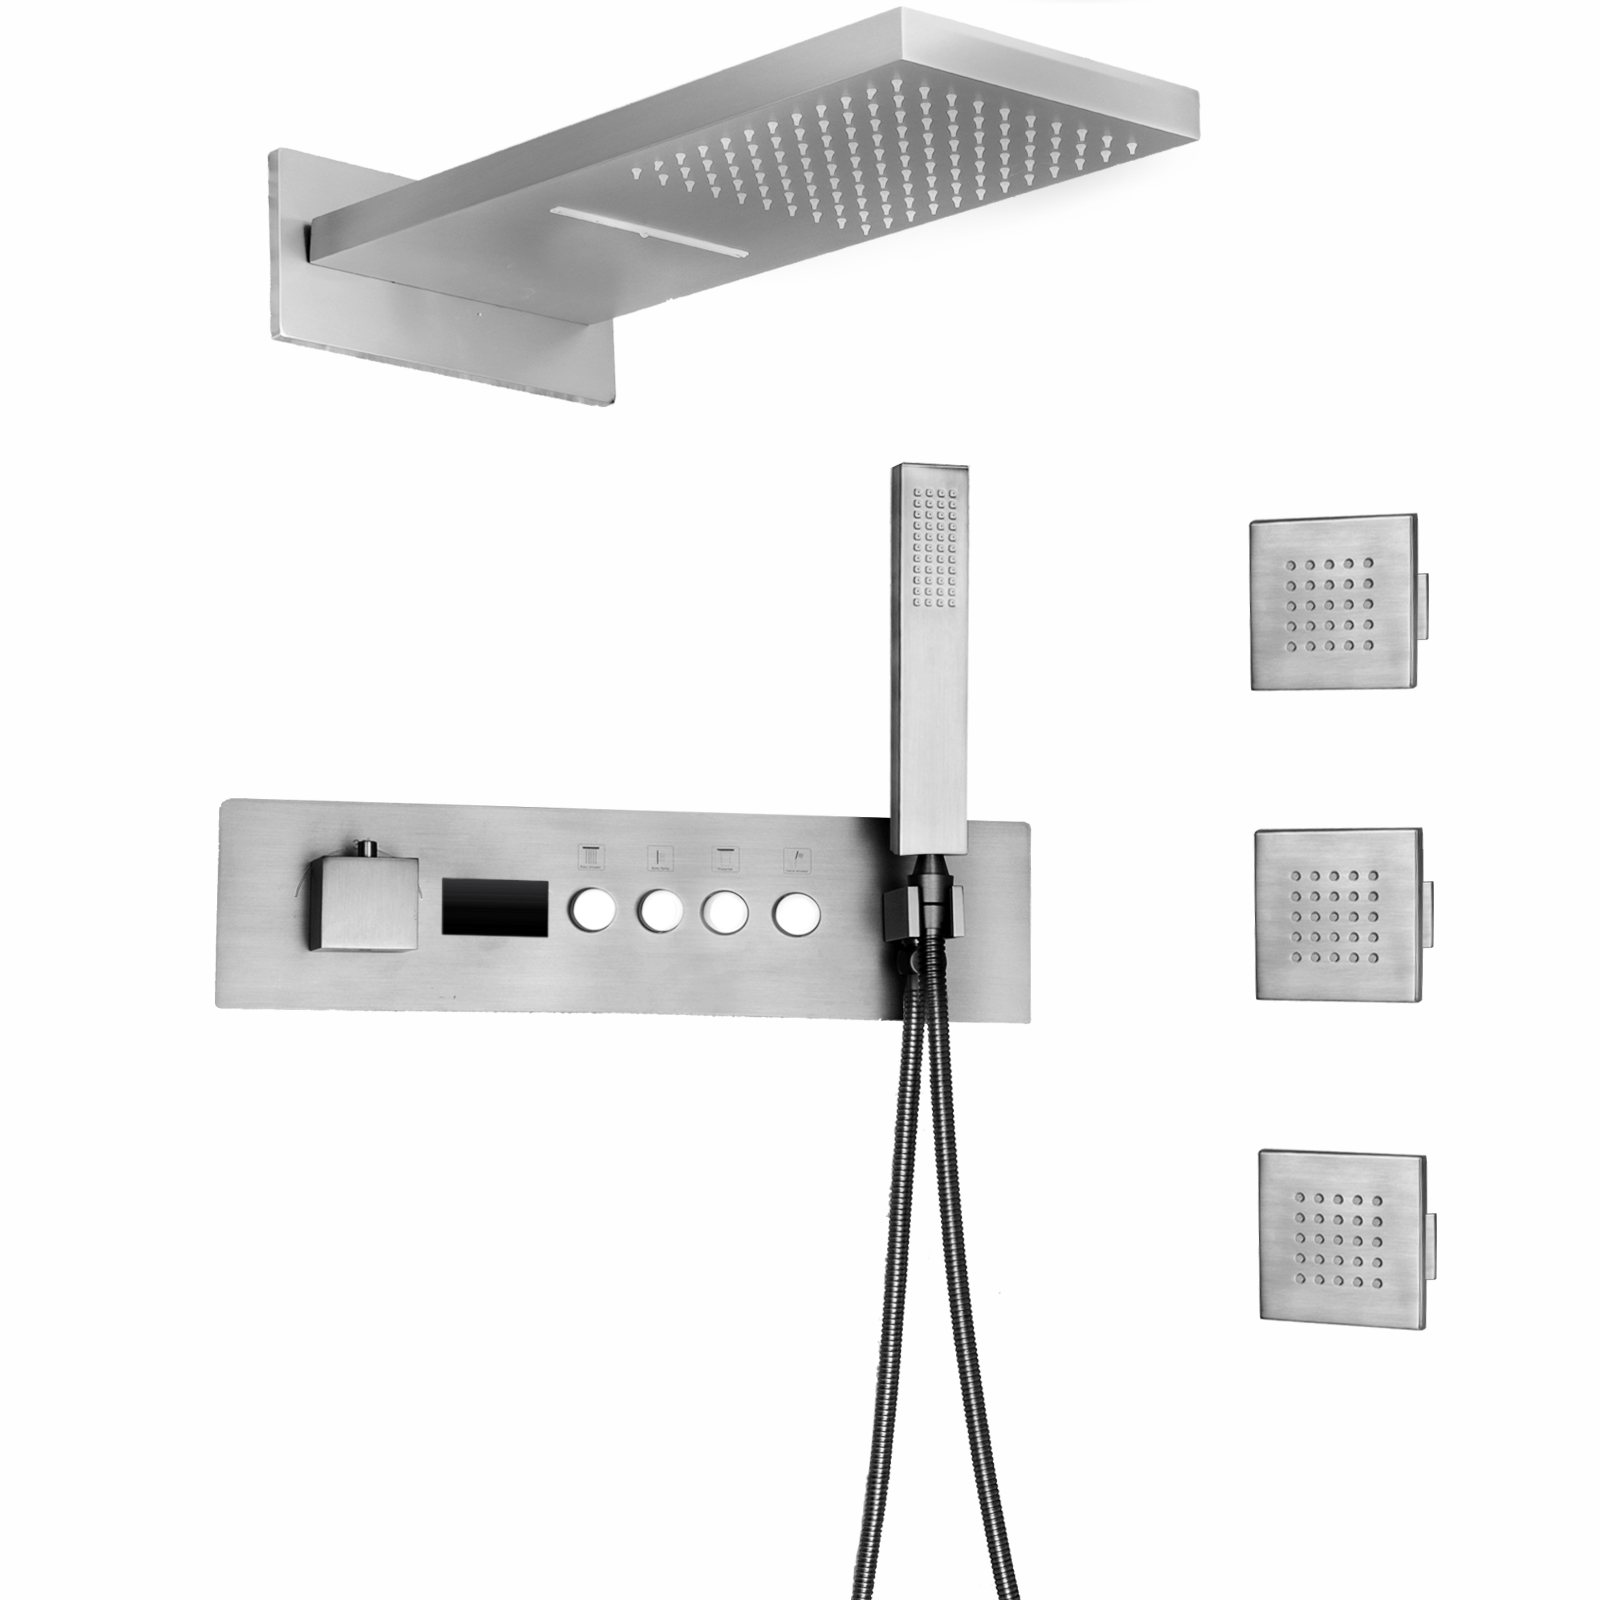 Modern Style Bathroom Shower Set With Body Jet Rain Waterfall Shower Head Thermostatic Main Body Wall Mounted Shower Faucet